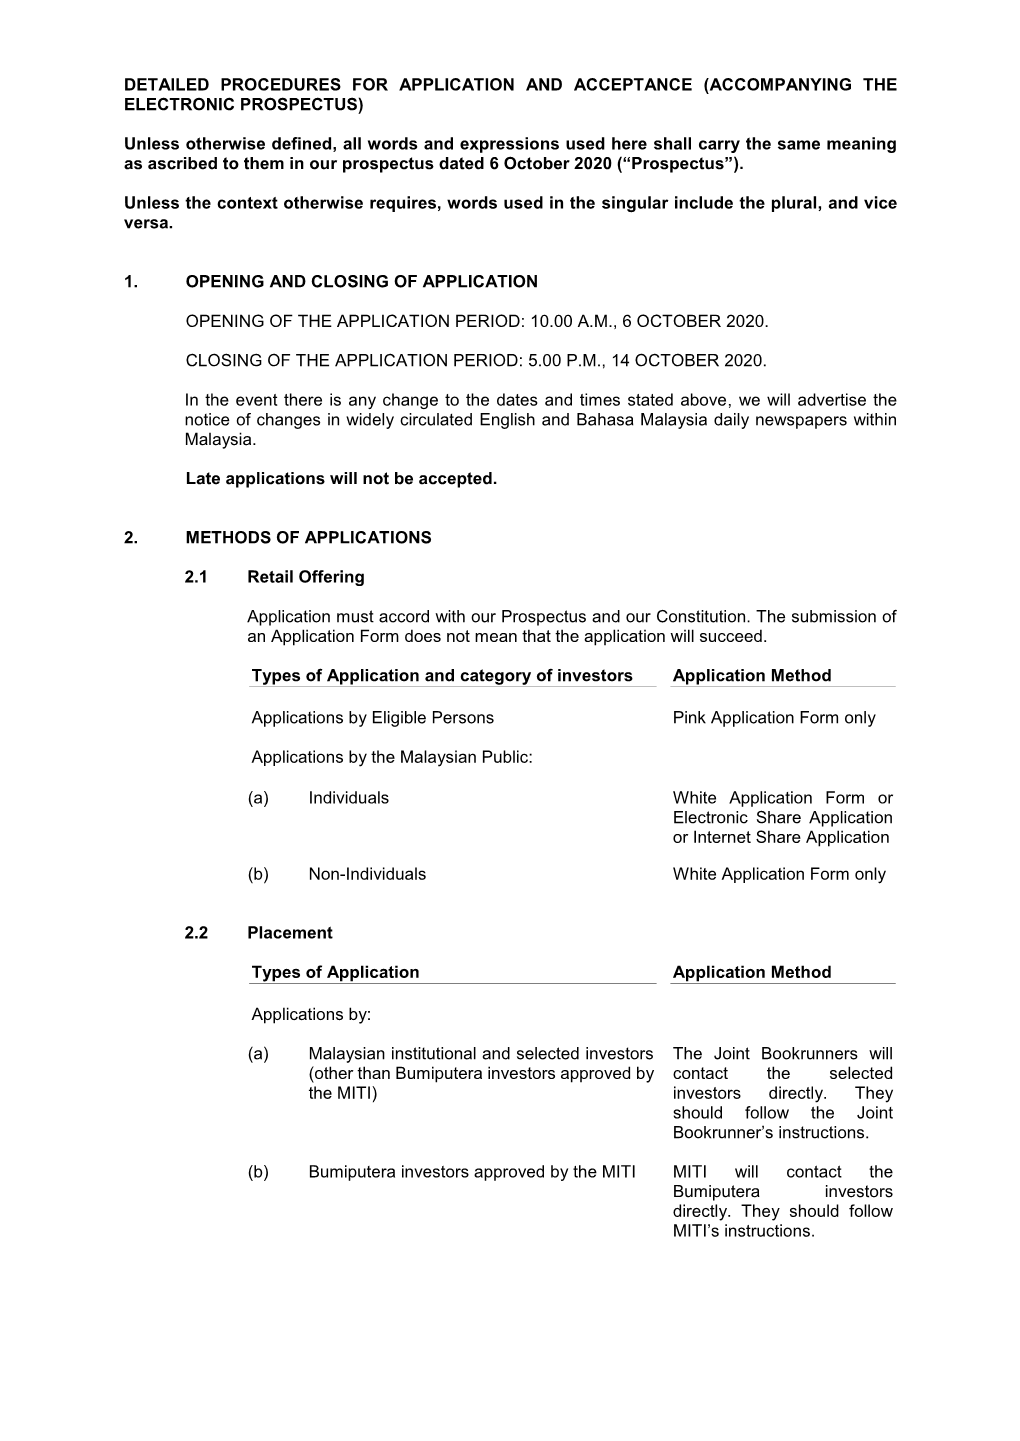 Detailed Procedures for Application and Acceptance (Accompanying the Electronic Prospectus)